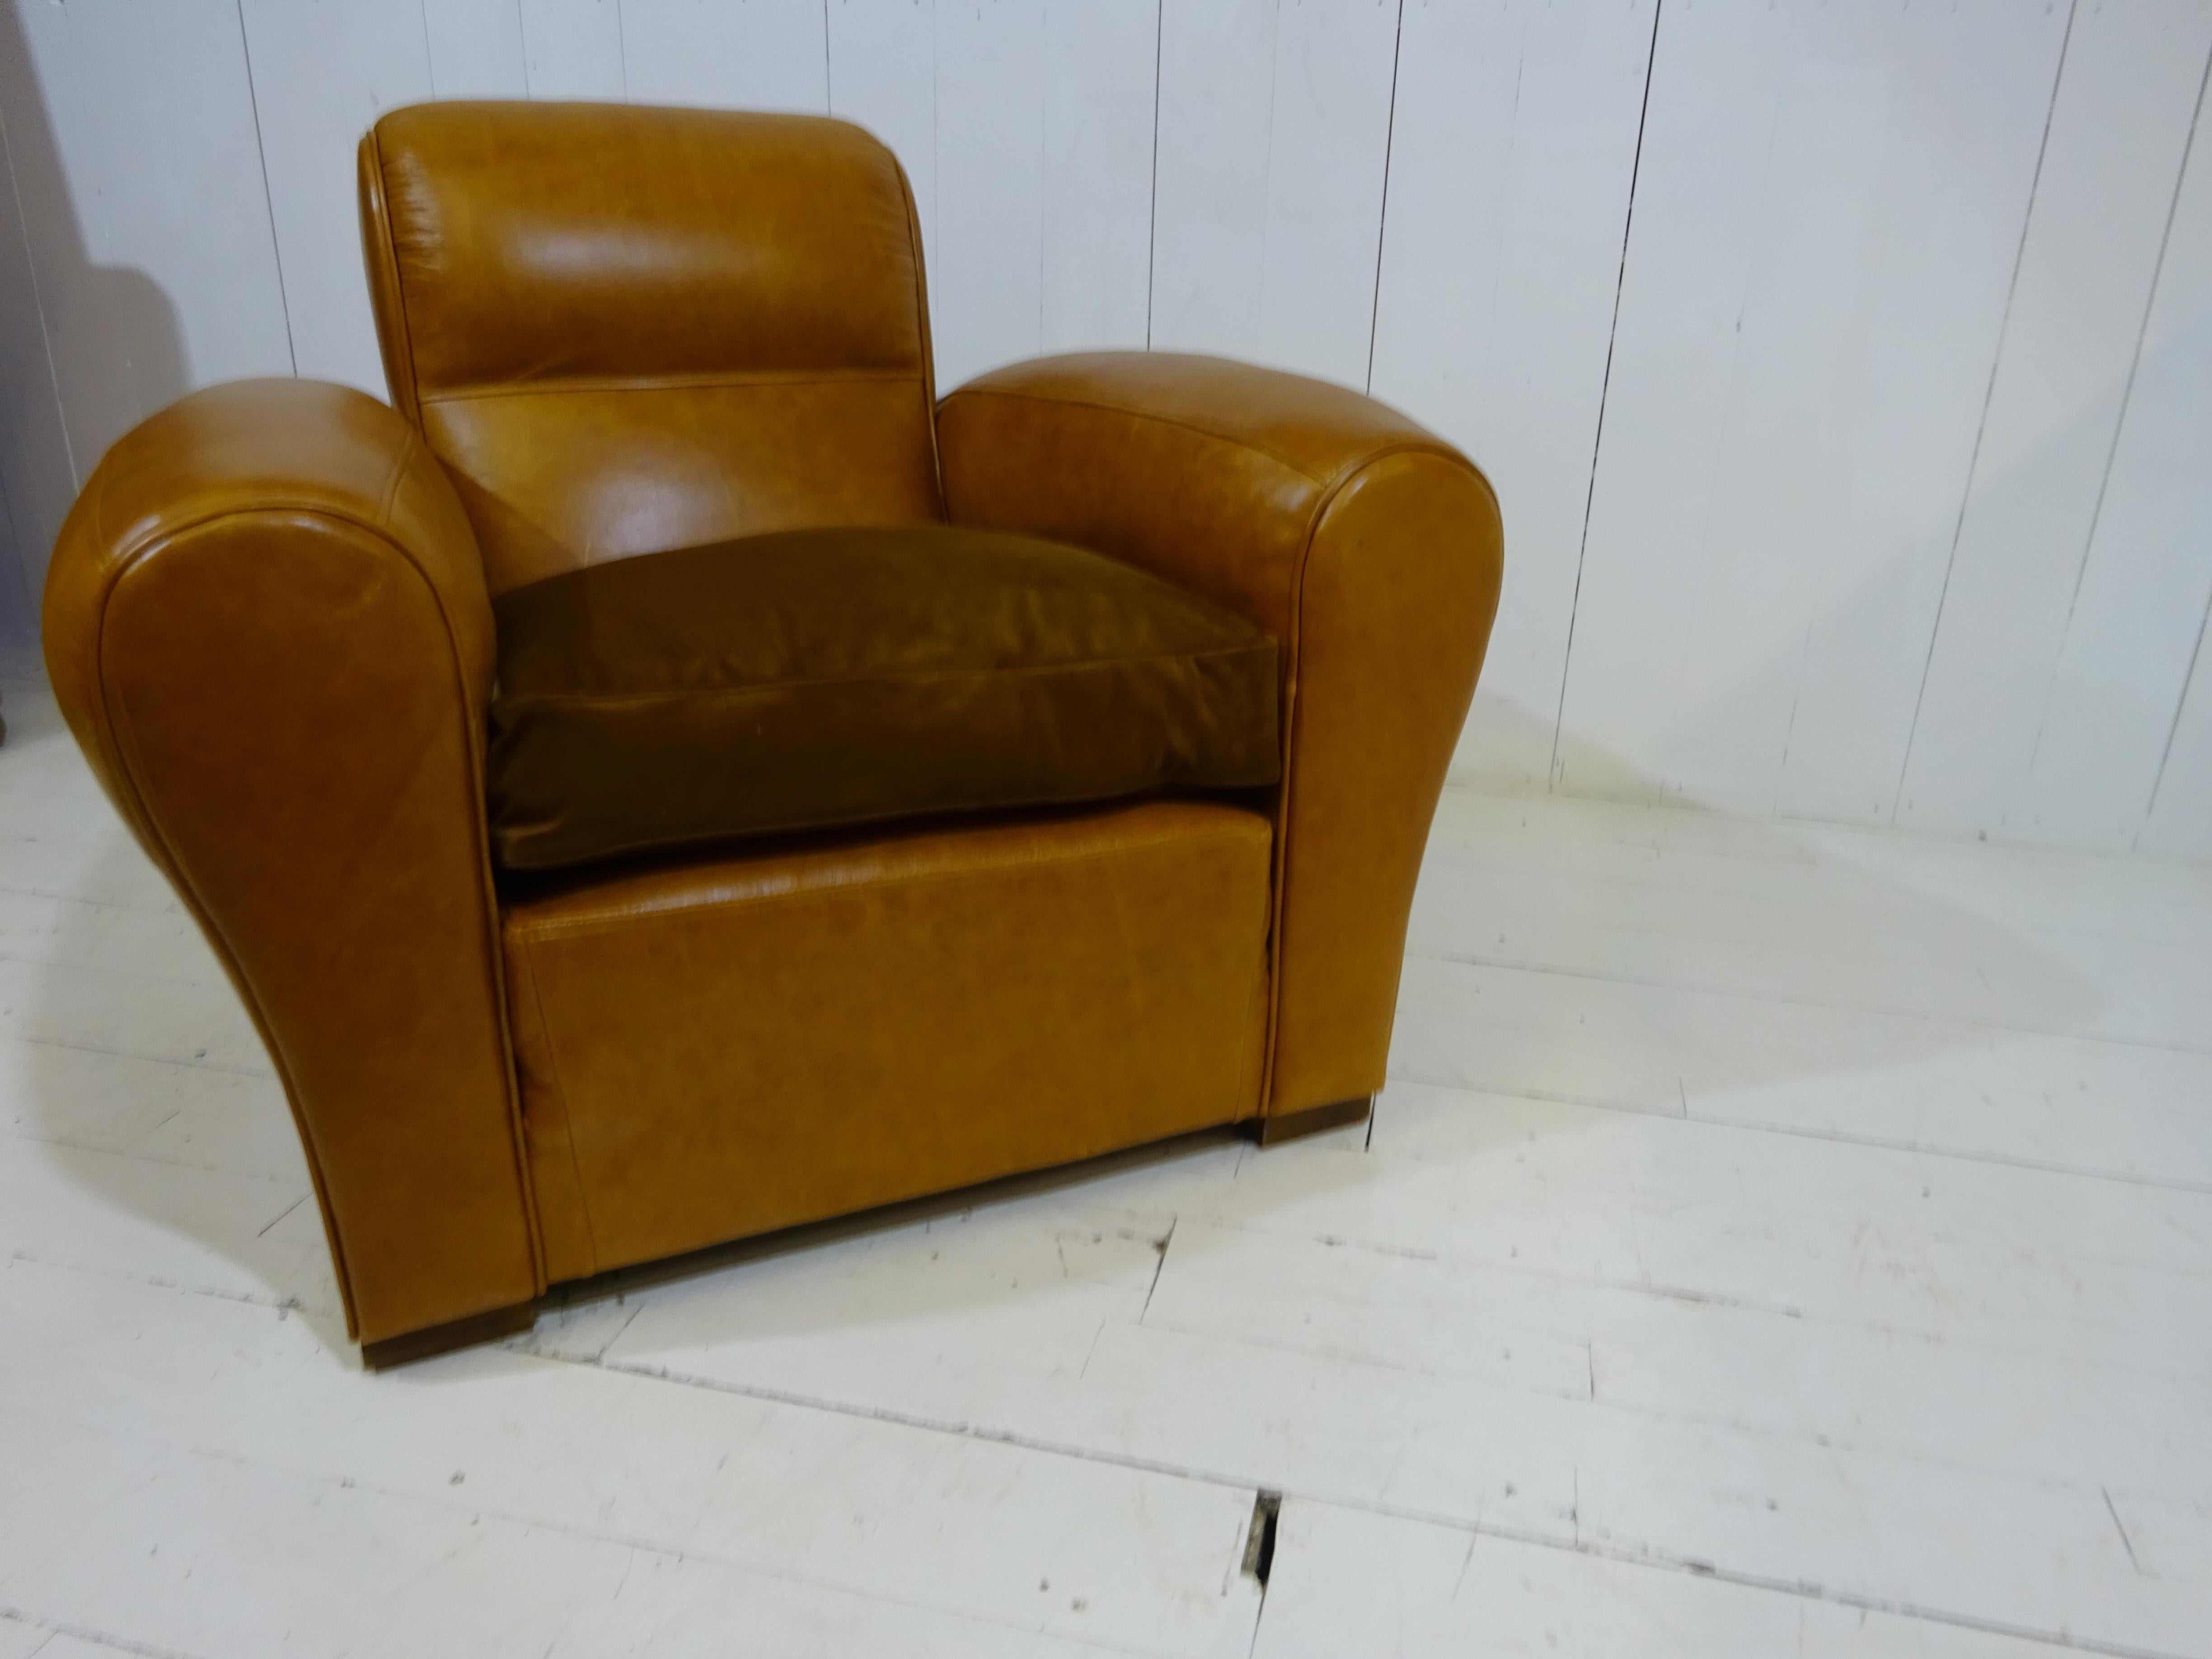 Hand-Crafted 1920's Art Deco Club Chair in Distressed Caramel Aniline Leather